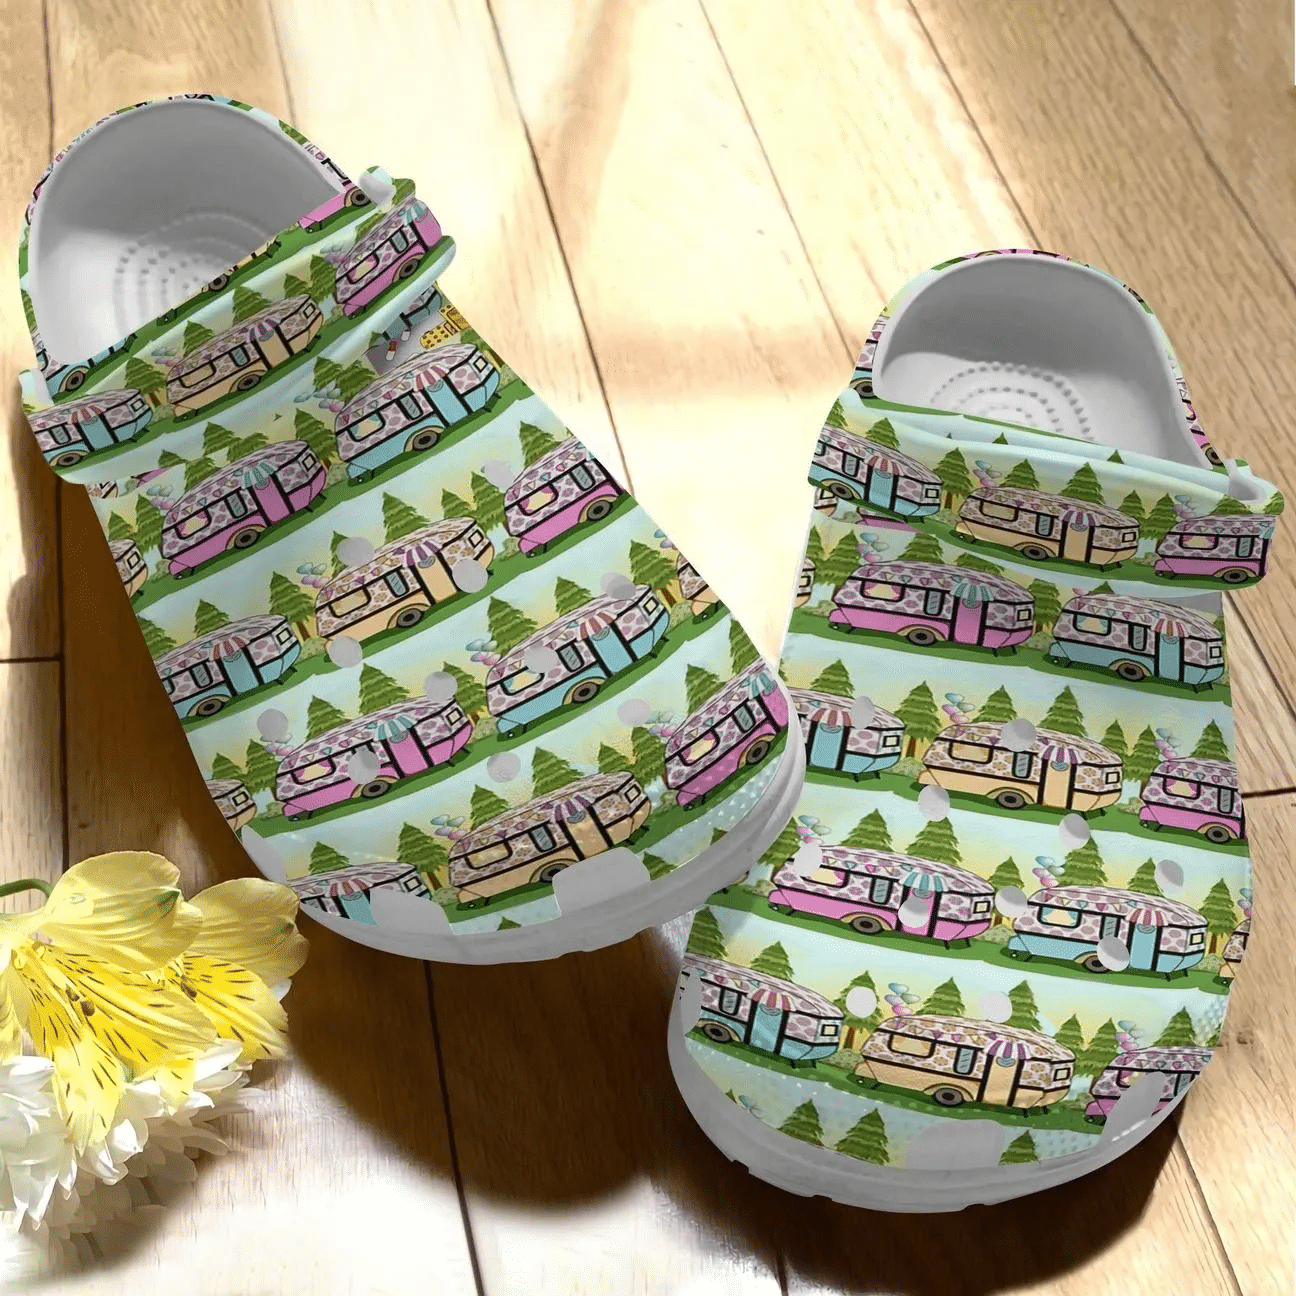 Camping Personalize Clog Custom Crocs Fashionstyle Comfortable For Women Men Kid Print 3D Whitesole Camper Vans